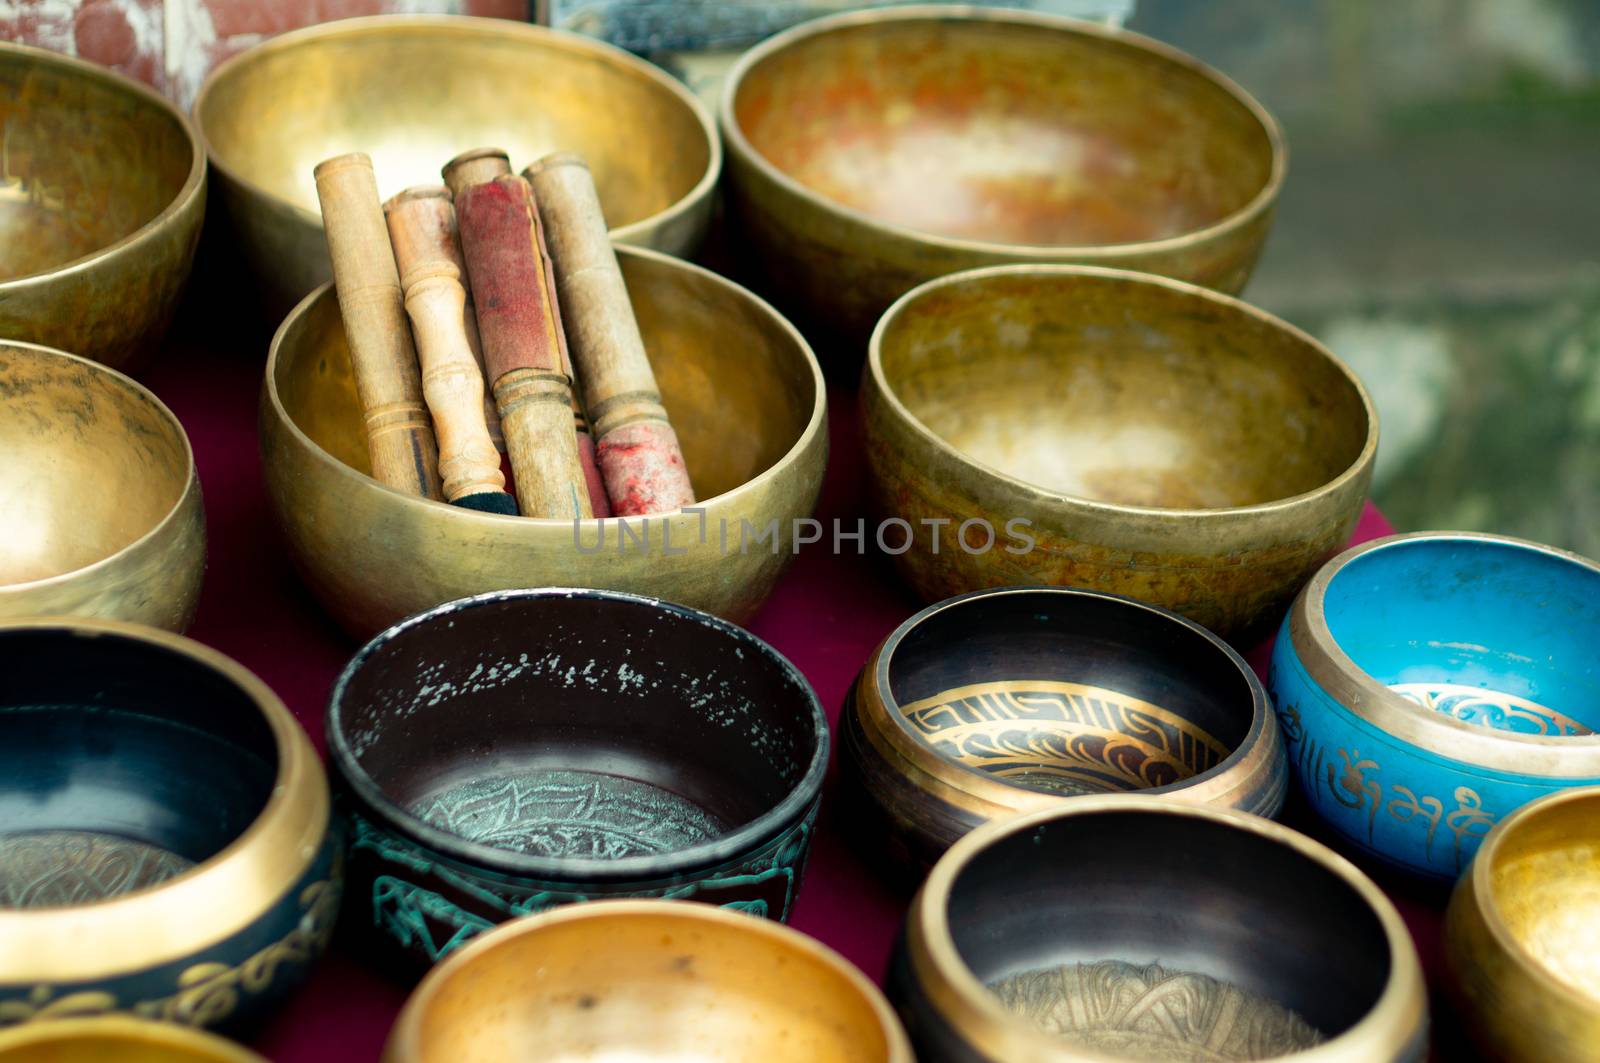 Brass singing musical bowls placed in a shop in mcleodganj himachal pradesh. Tibetan singing bowls are a popular souvenir helps in relaxation and fun